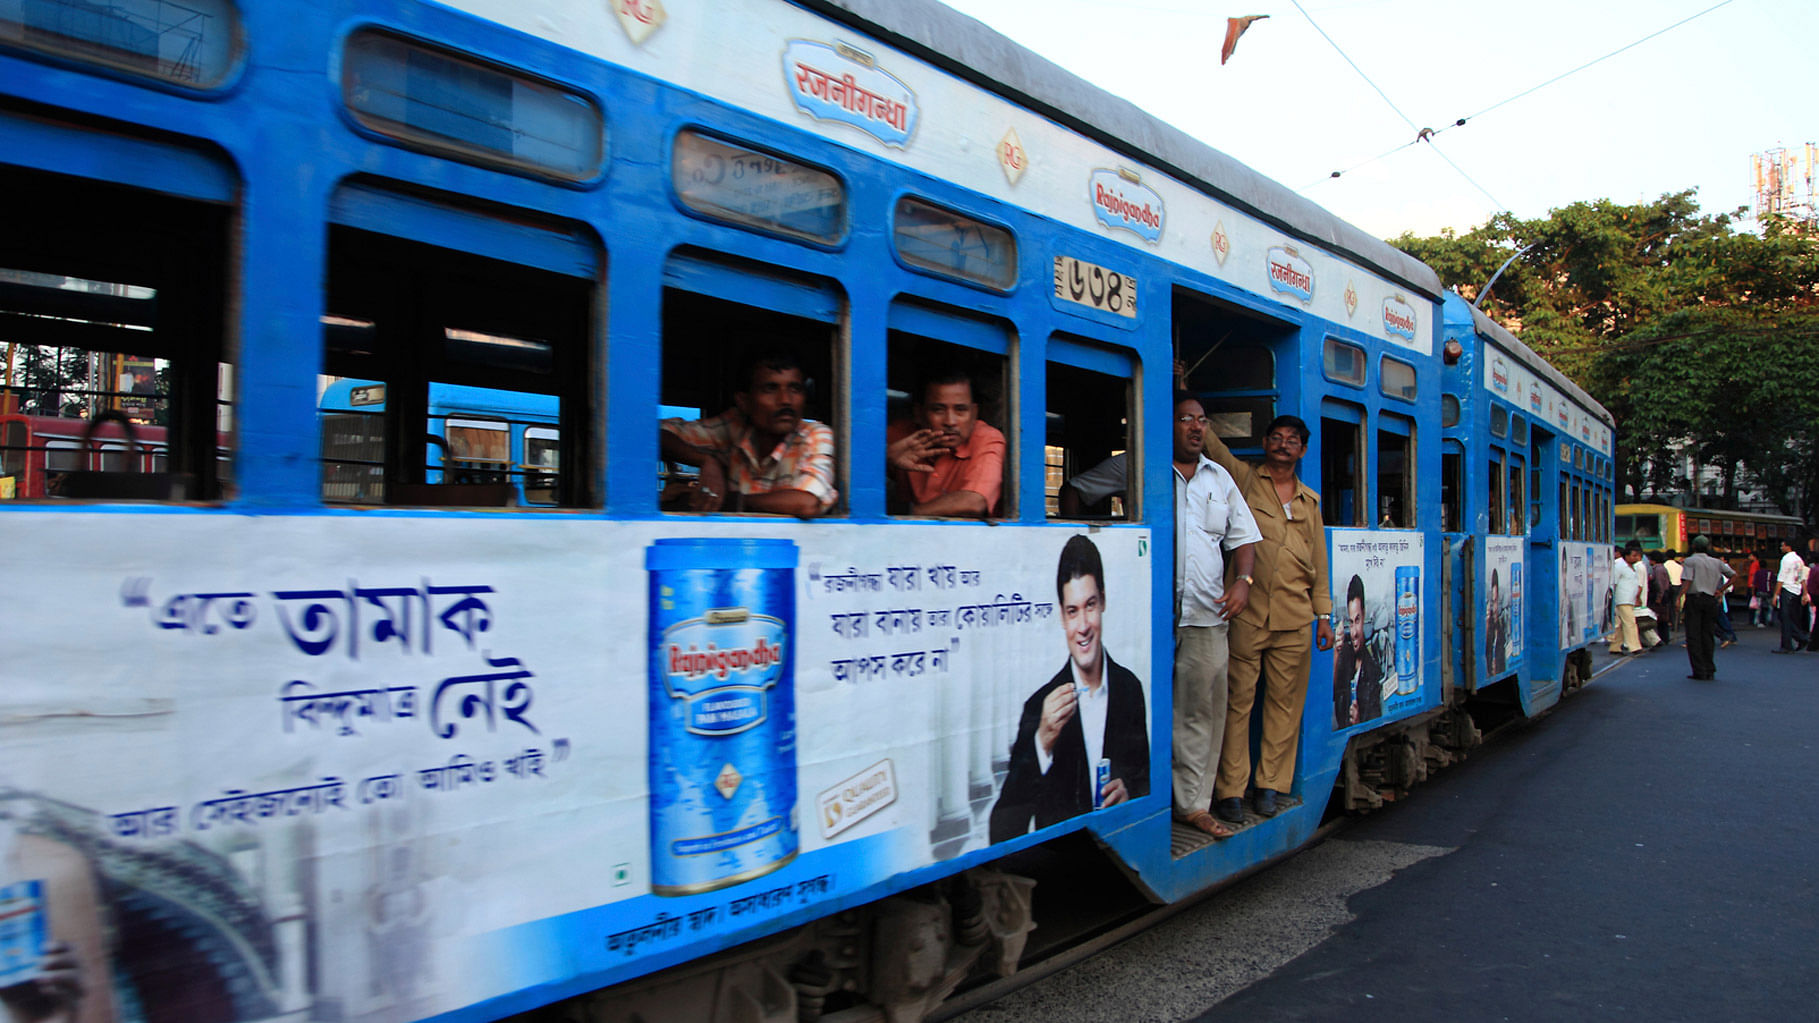 People traveling by tram in Kolkata, West Bengal. (Photo: iStockphoto)